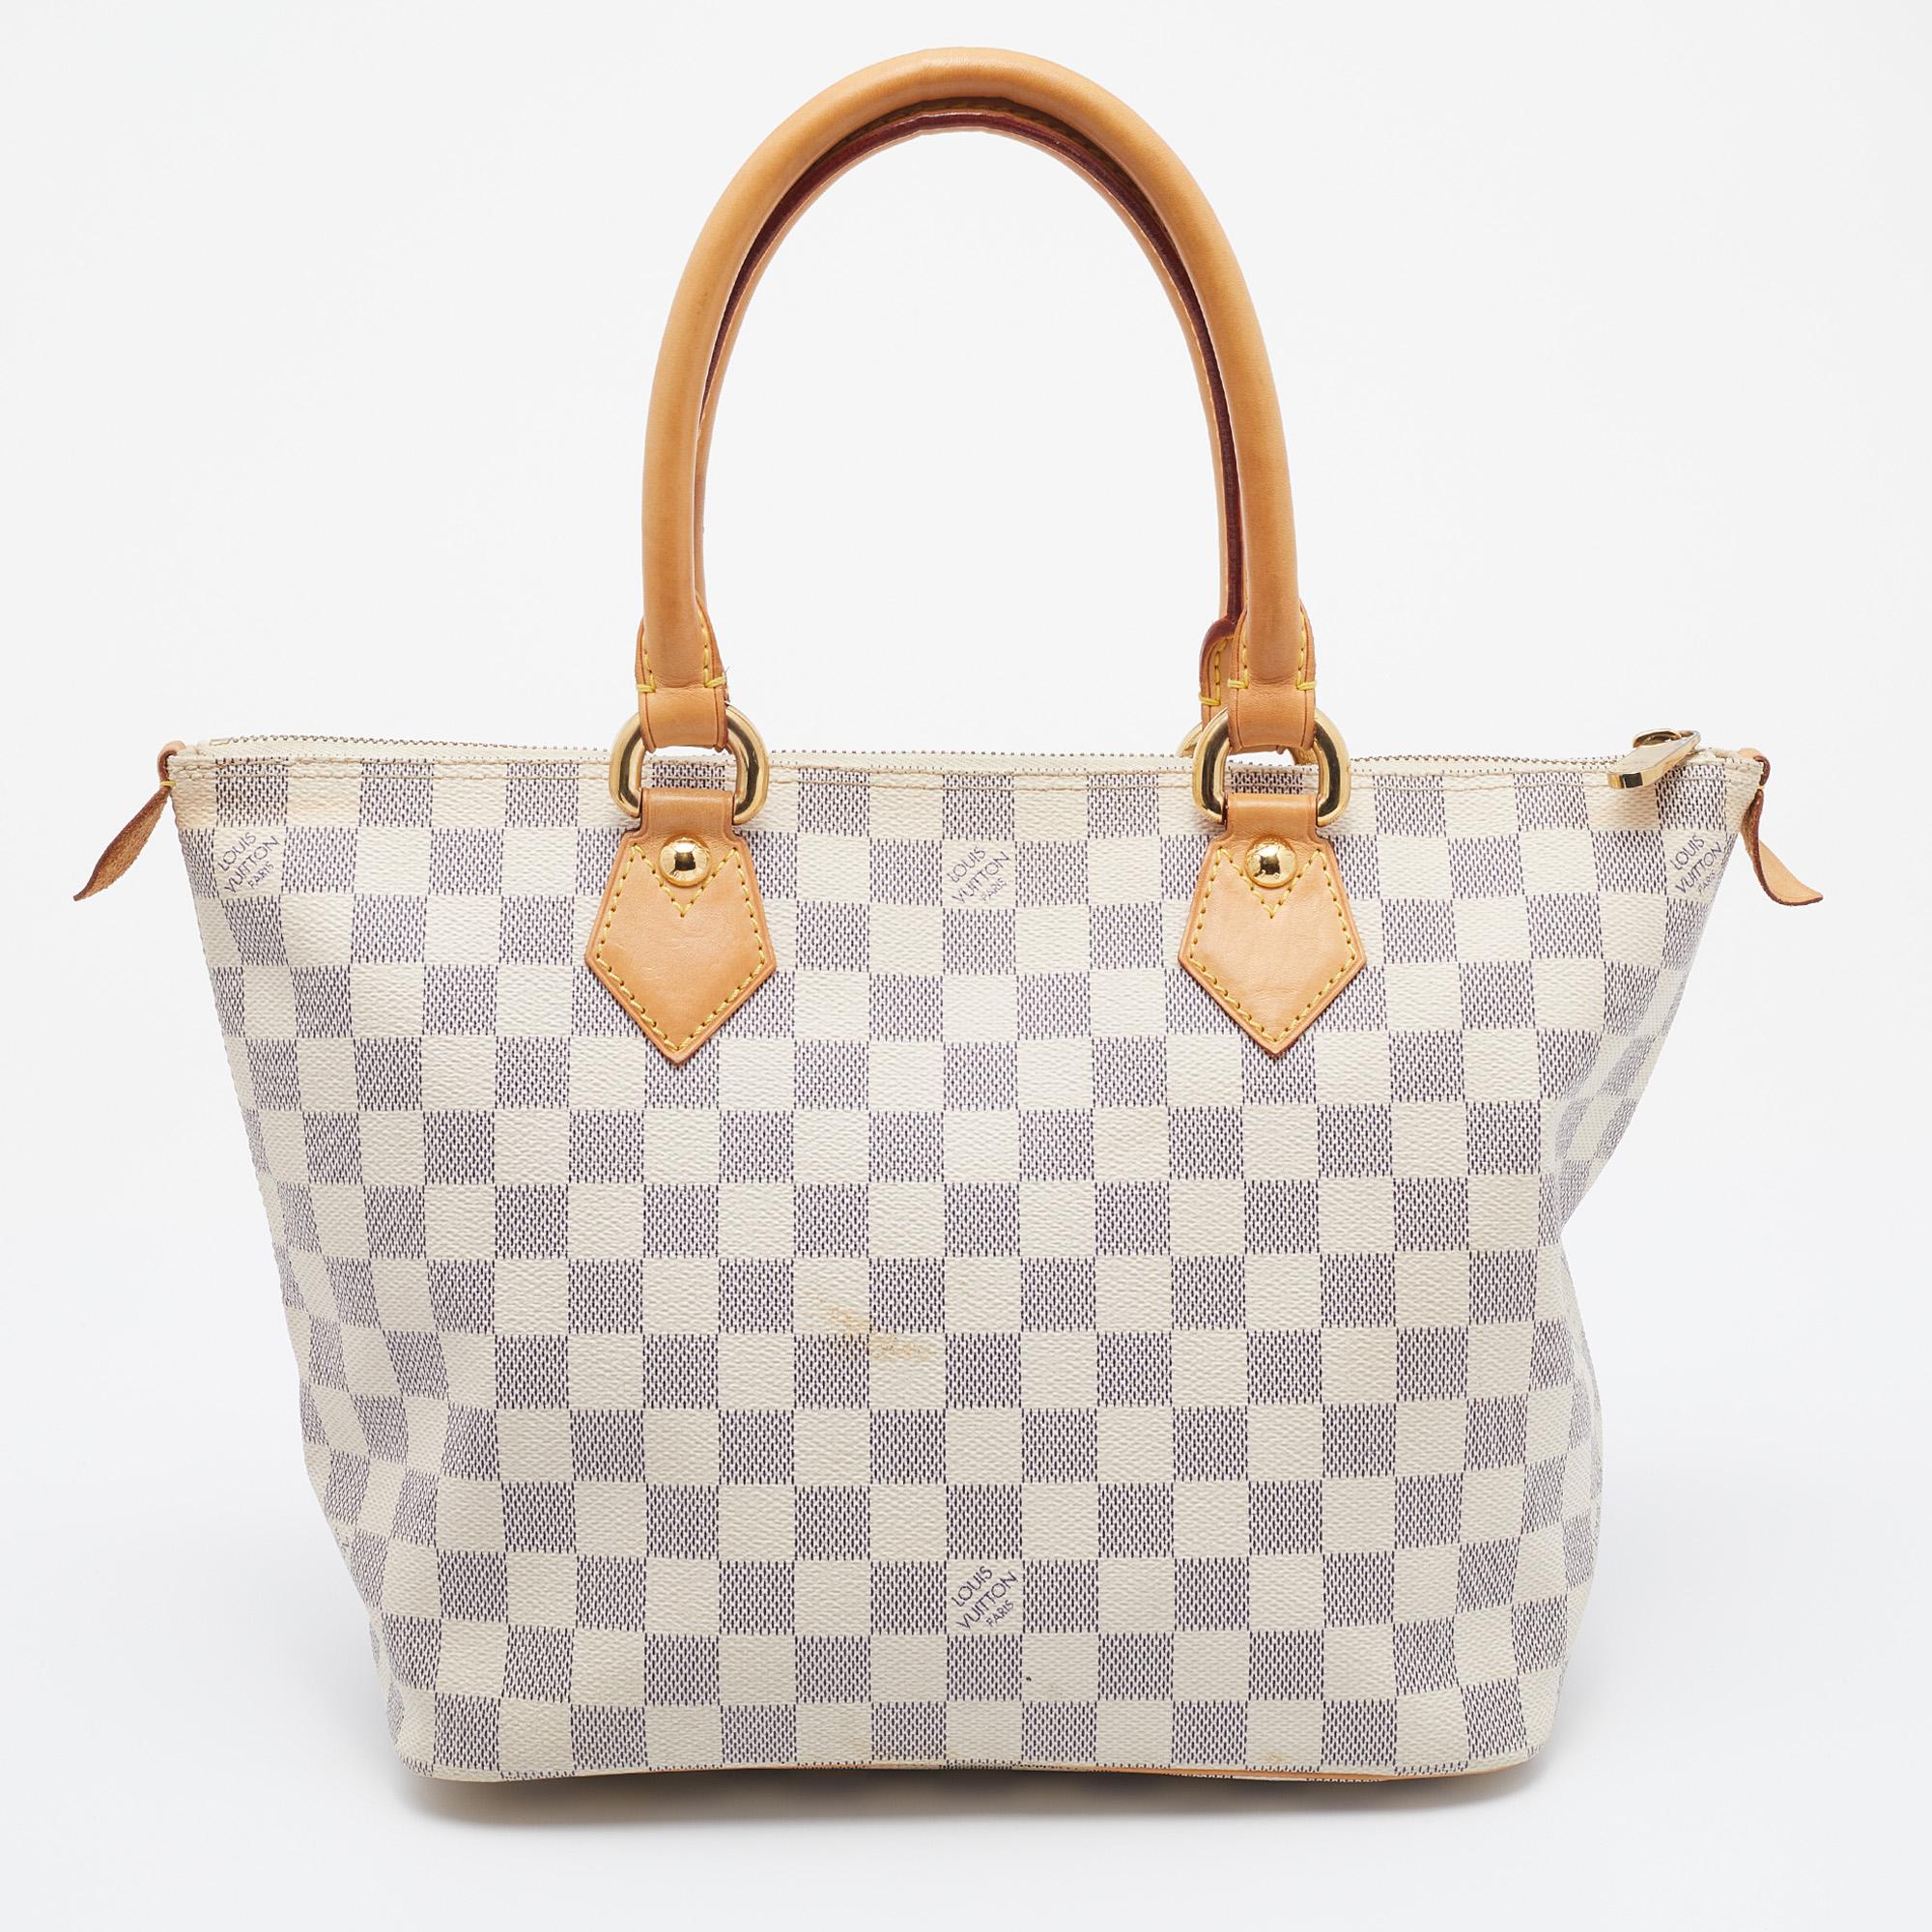 With an architectural shape, this Louis Vuitton Saleya PM bag is impressive with its minimal design and classic elements. It is made from Damier Azur canvas and reminds you of the label's meticulous craftsmanship. Lined with Alcantara, it is capable